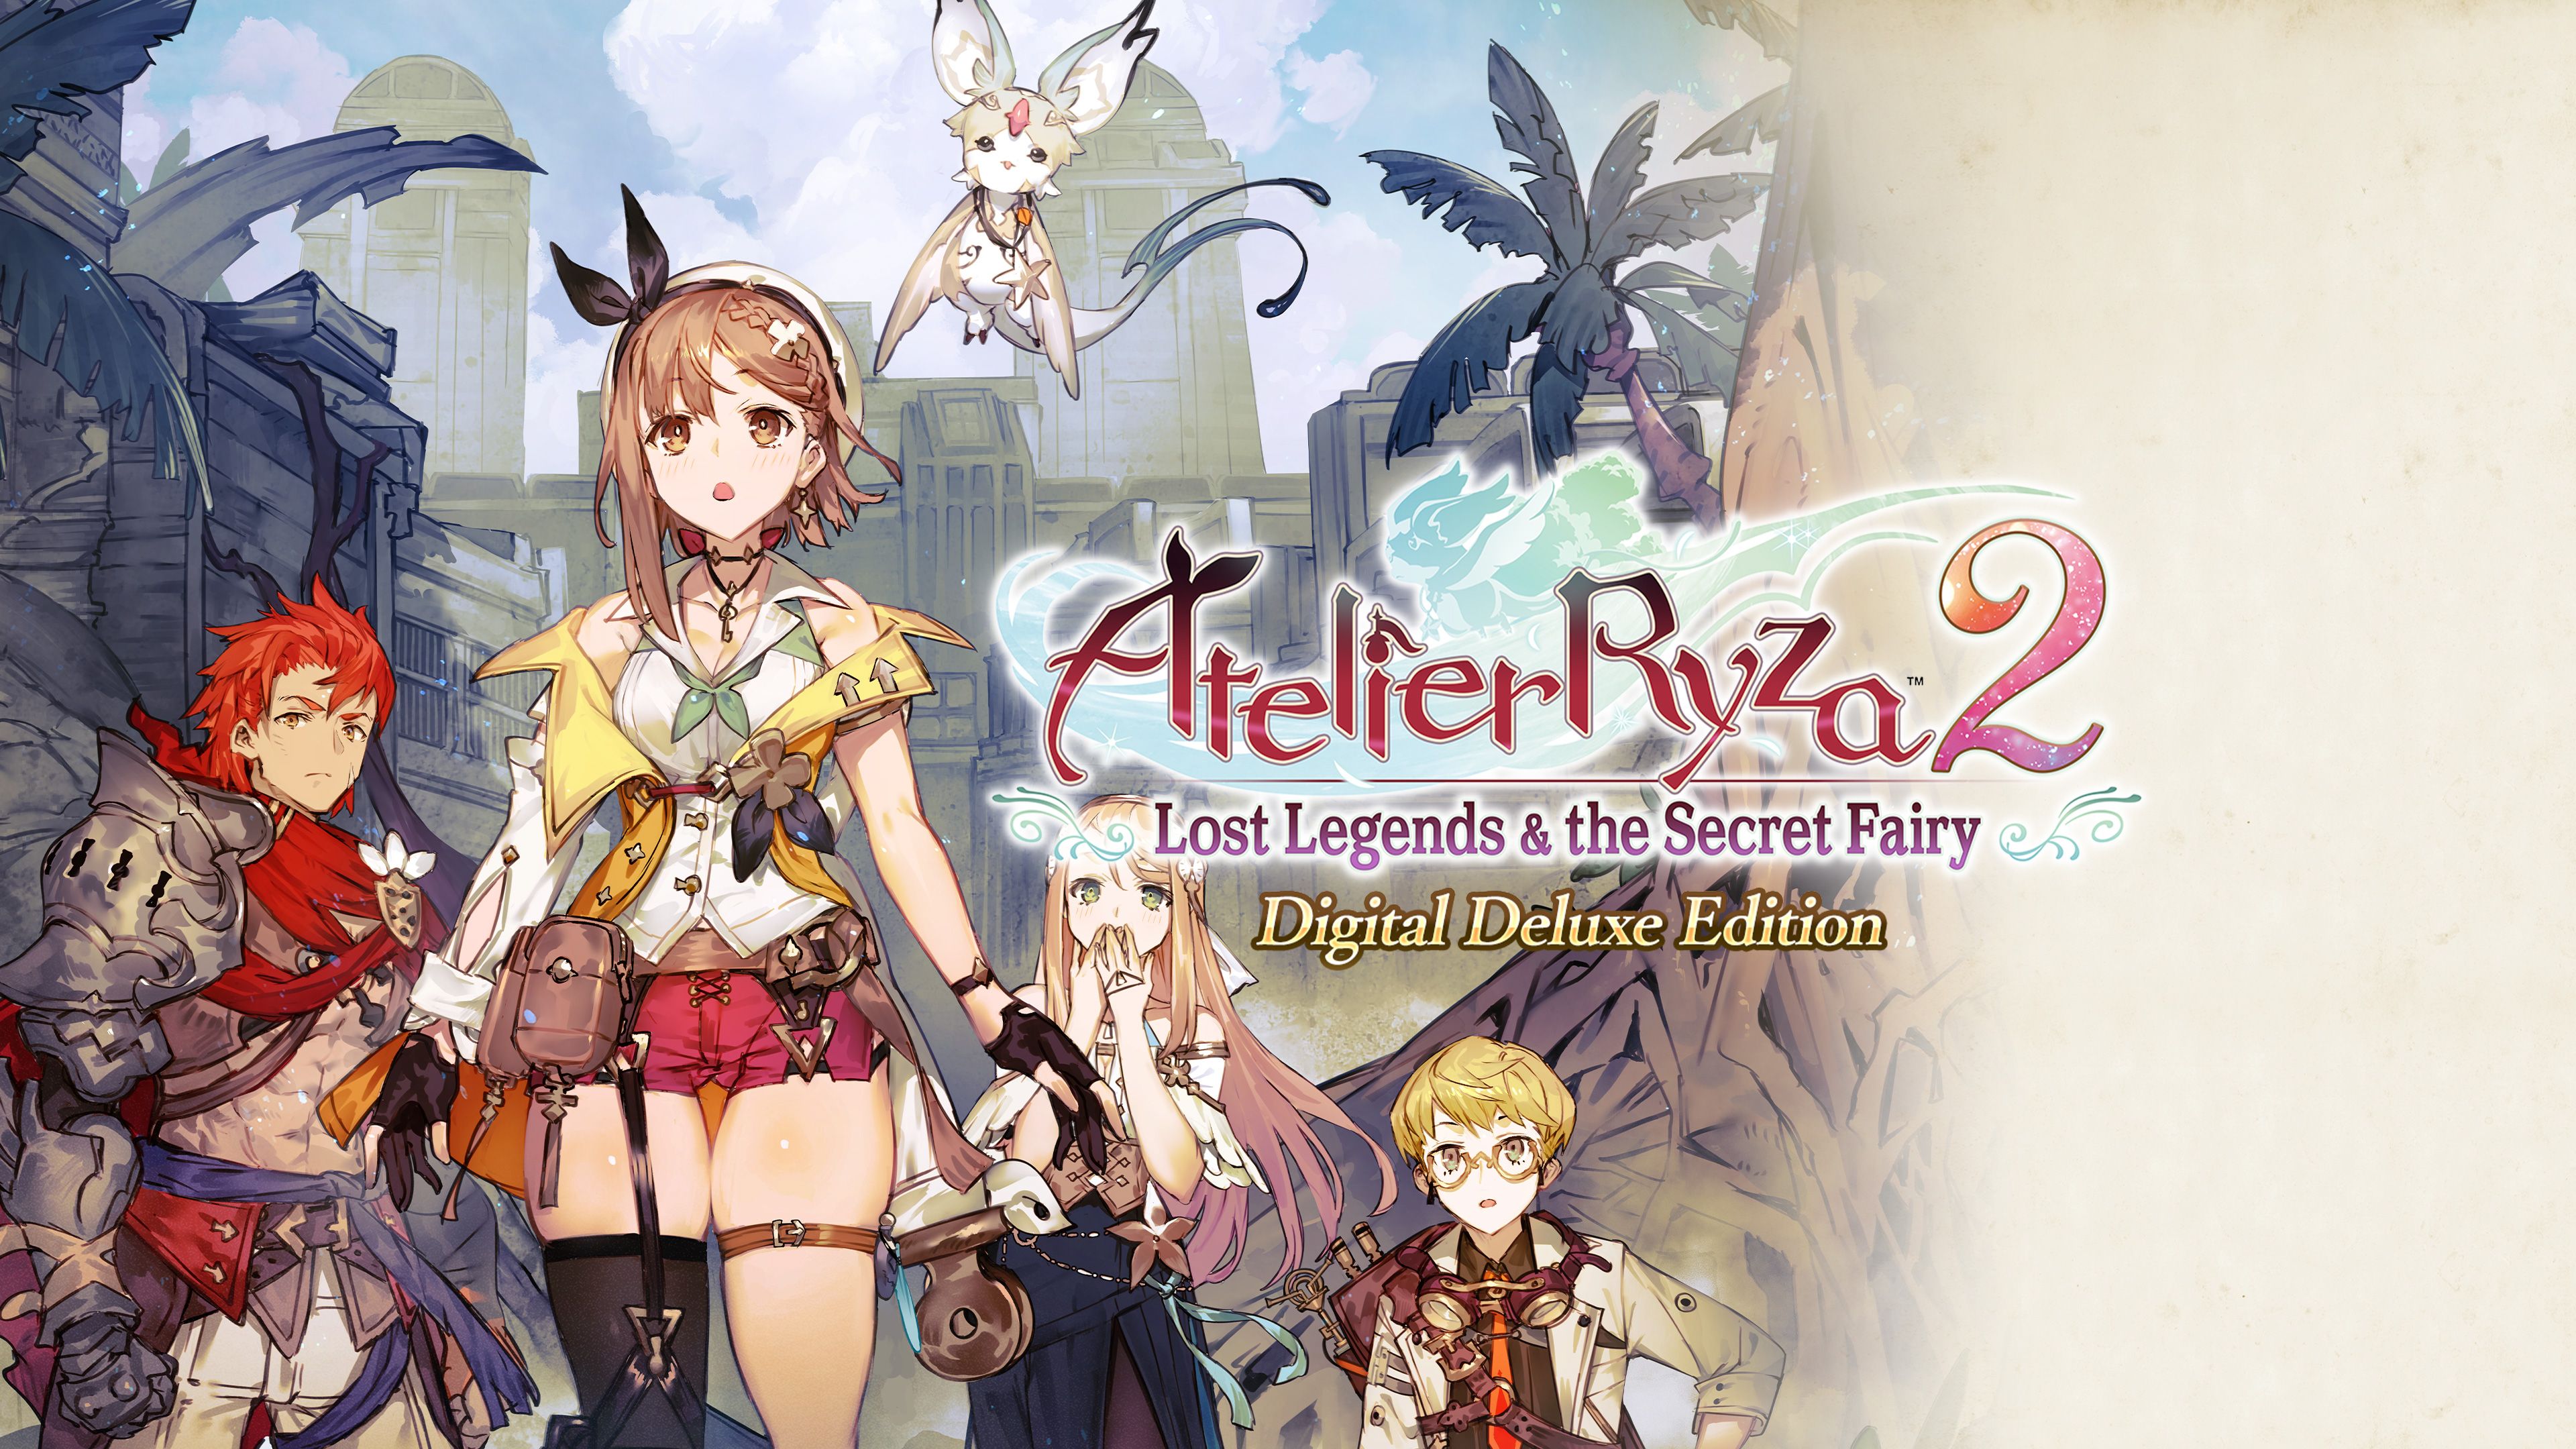 Video Game Atelier Ryza 2: Lost Legends & the Secret Fairy HD Wallpaper | Background Image